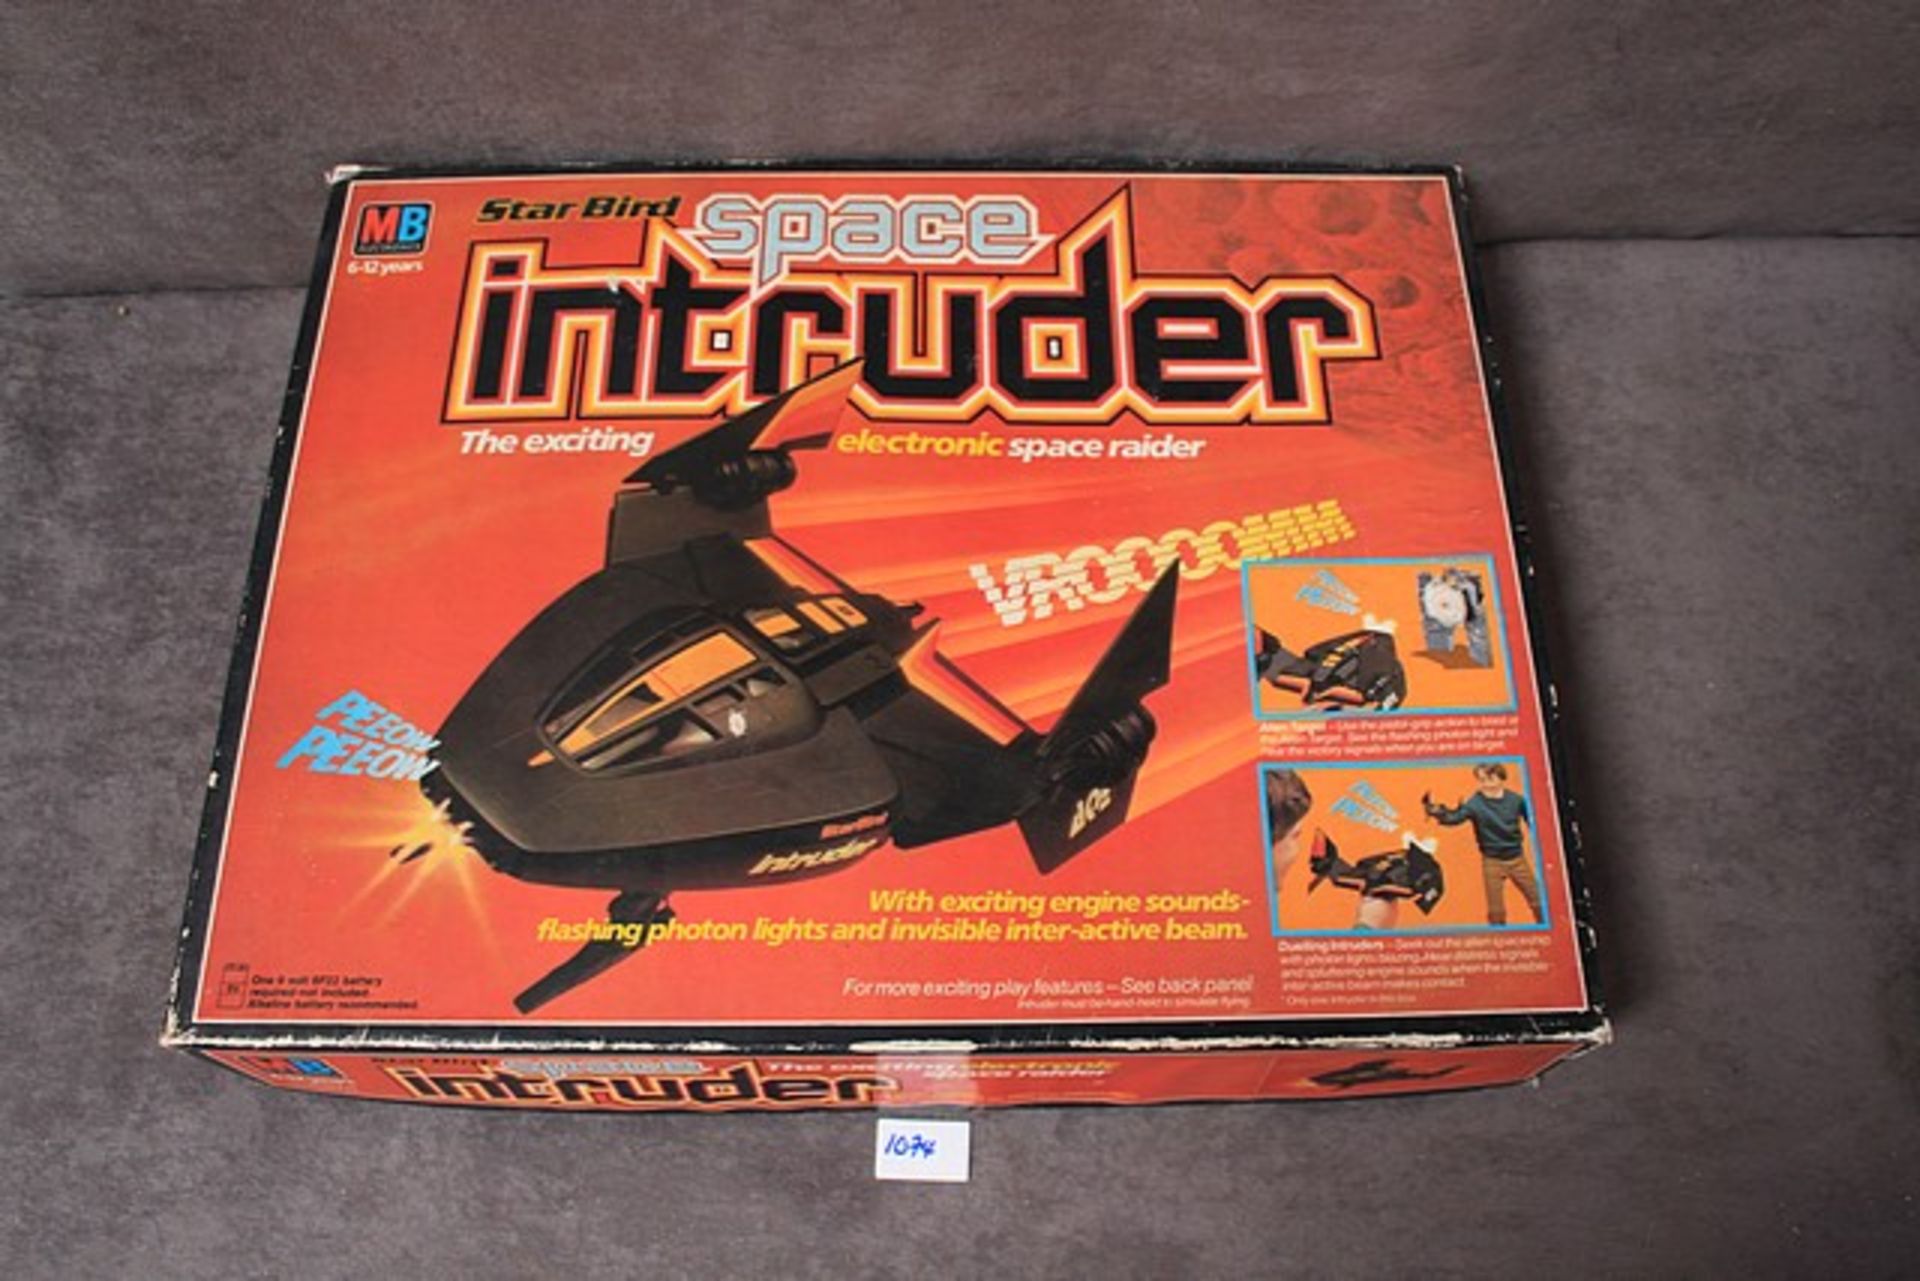 MB Milton Bradley Electronic 1979 Star Bird Space Intruder boxed - Image 2 of 2